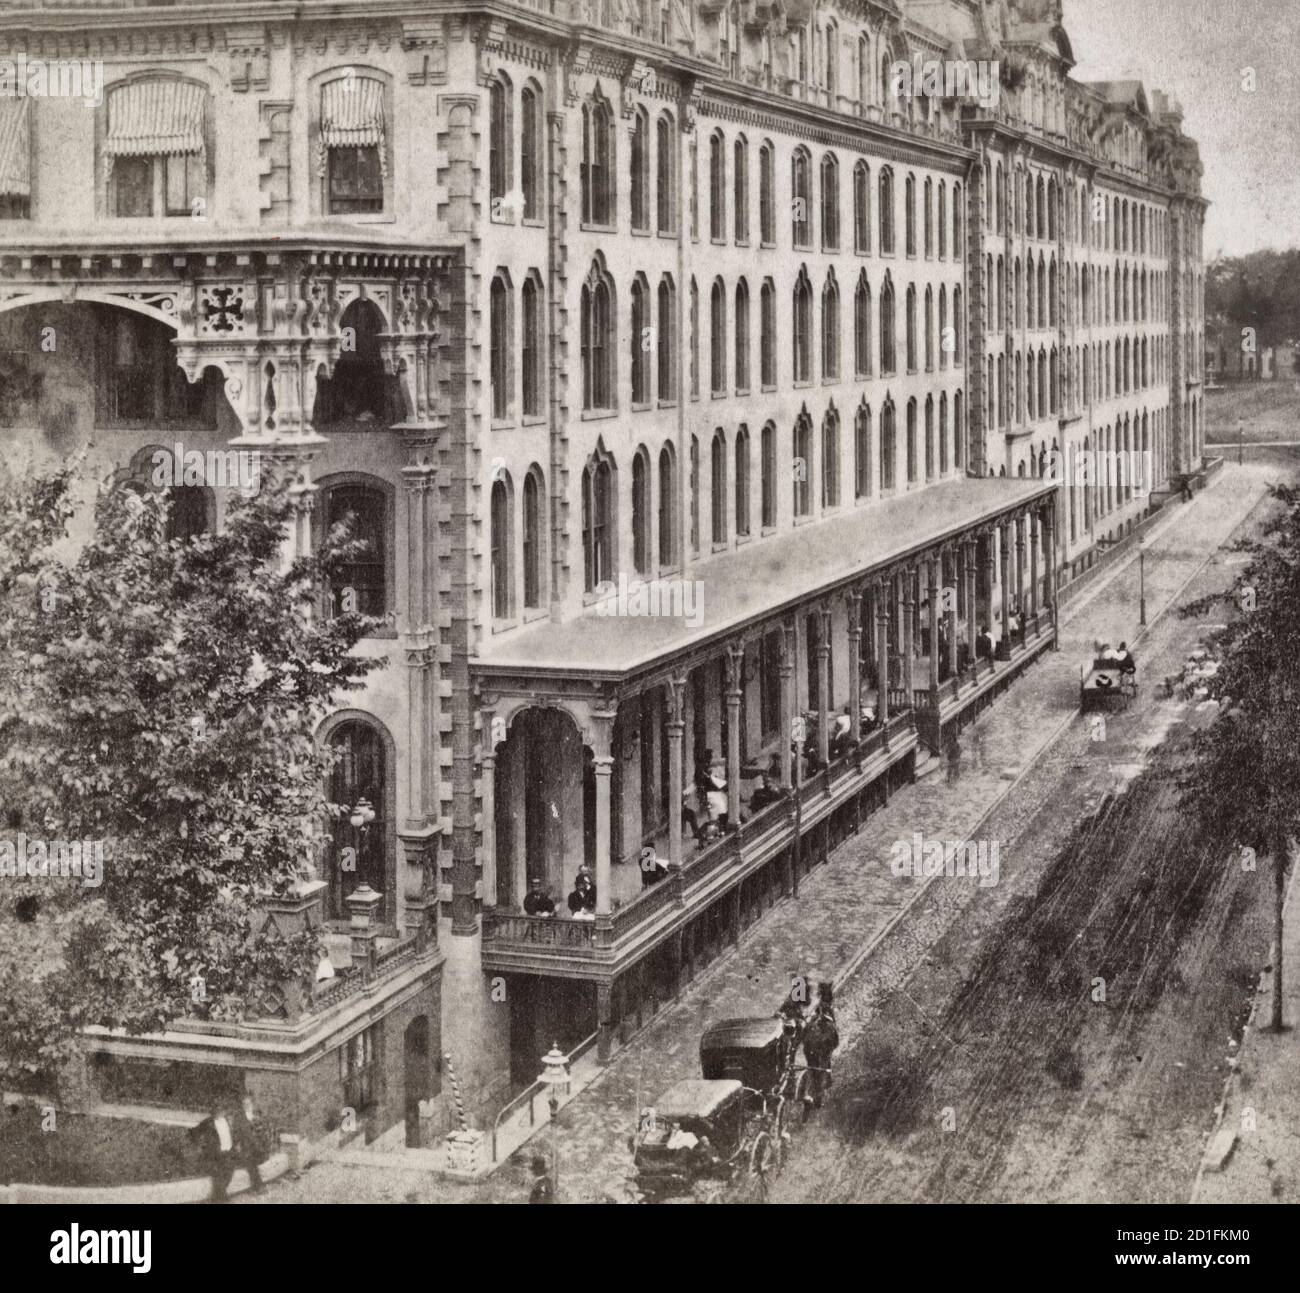 Division Street front, U.S. Hotel, Saratoga, New York, vers 1880 Banque D'Images